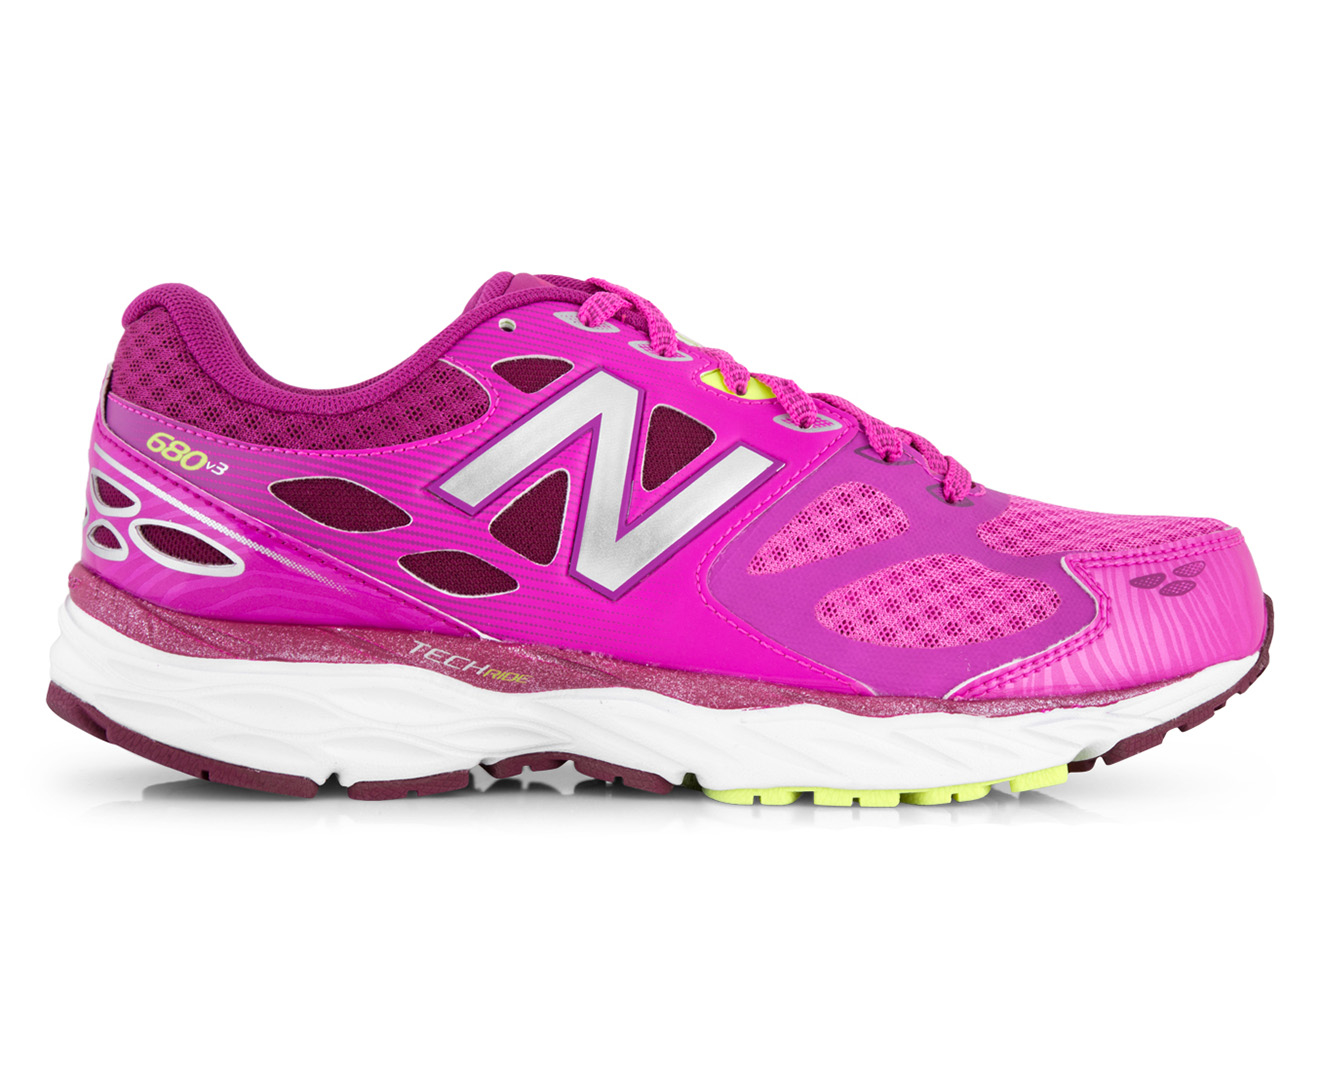 New Balance Women's Wide Fit 680 v3 Shoe - Pink/Silver | Scoopon Shopping